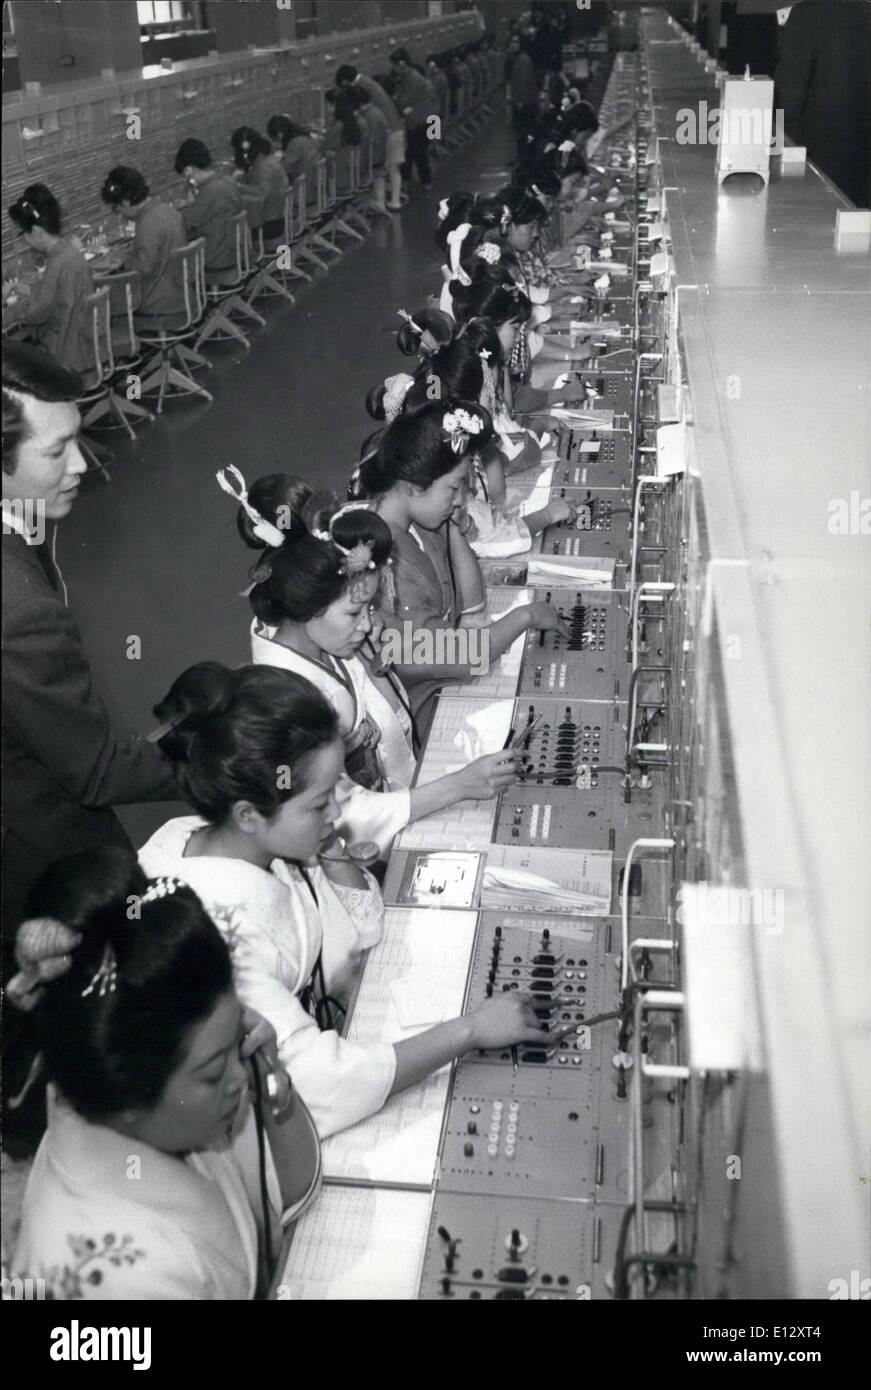 Feb. 25, 2012 - Official Commencement Of Work In 1971: The switchboard operators of the long-distance exchange office of telegraph, Tokyo, seen wearing their holiday cloths to celebrate the official commencement of work this year. Stock Photo